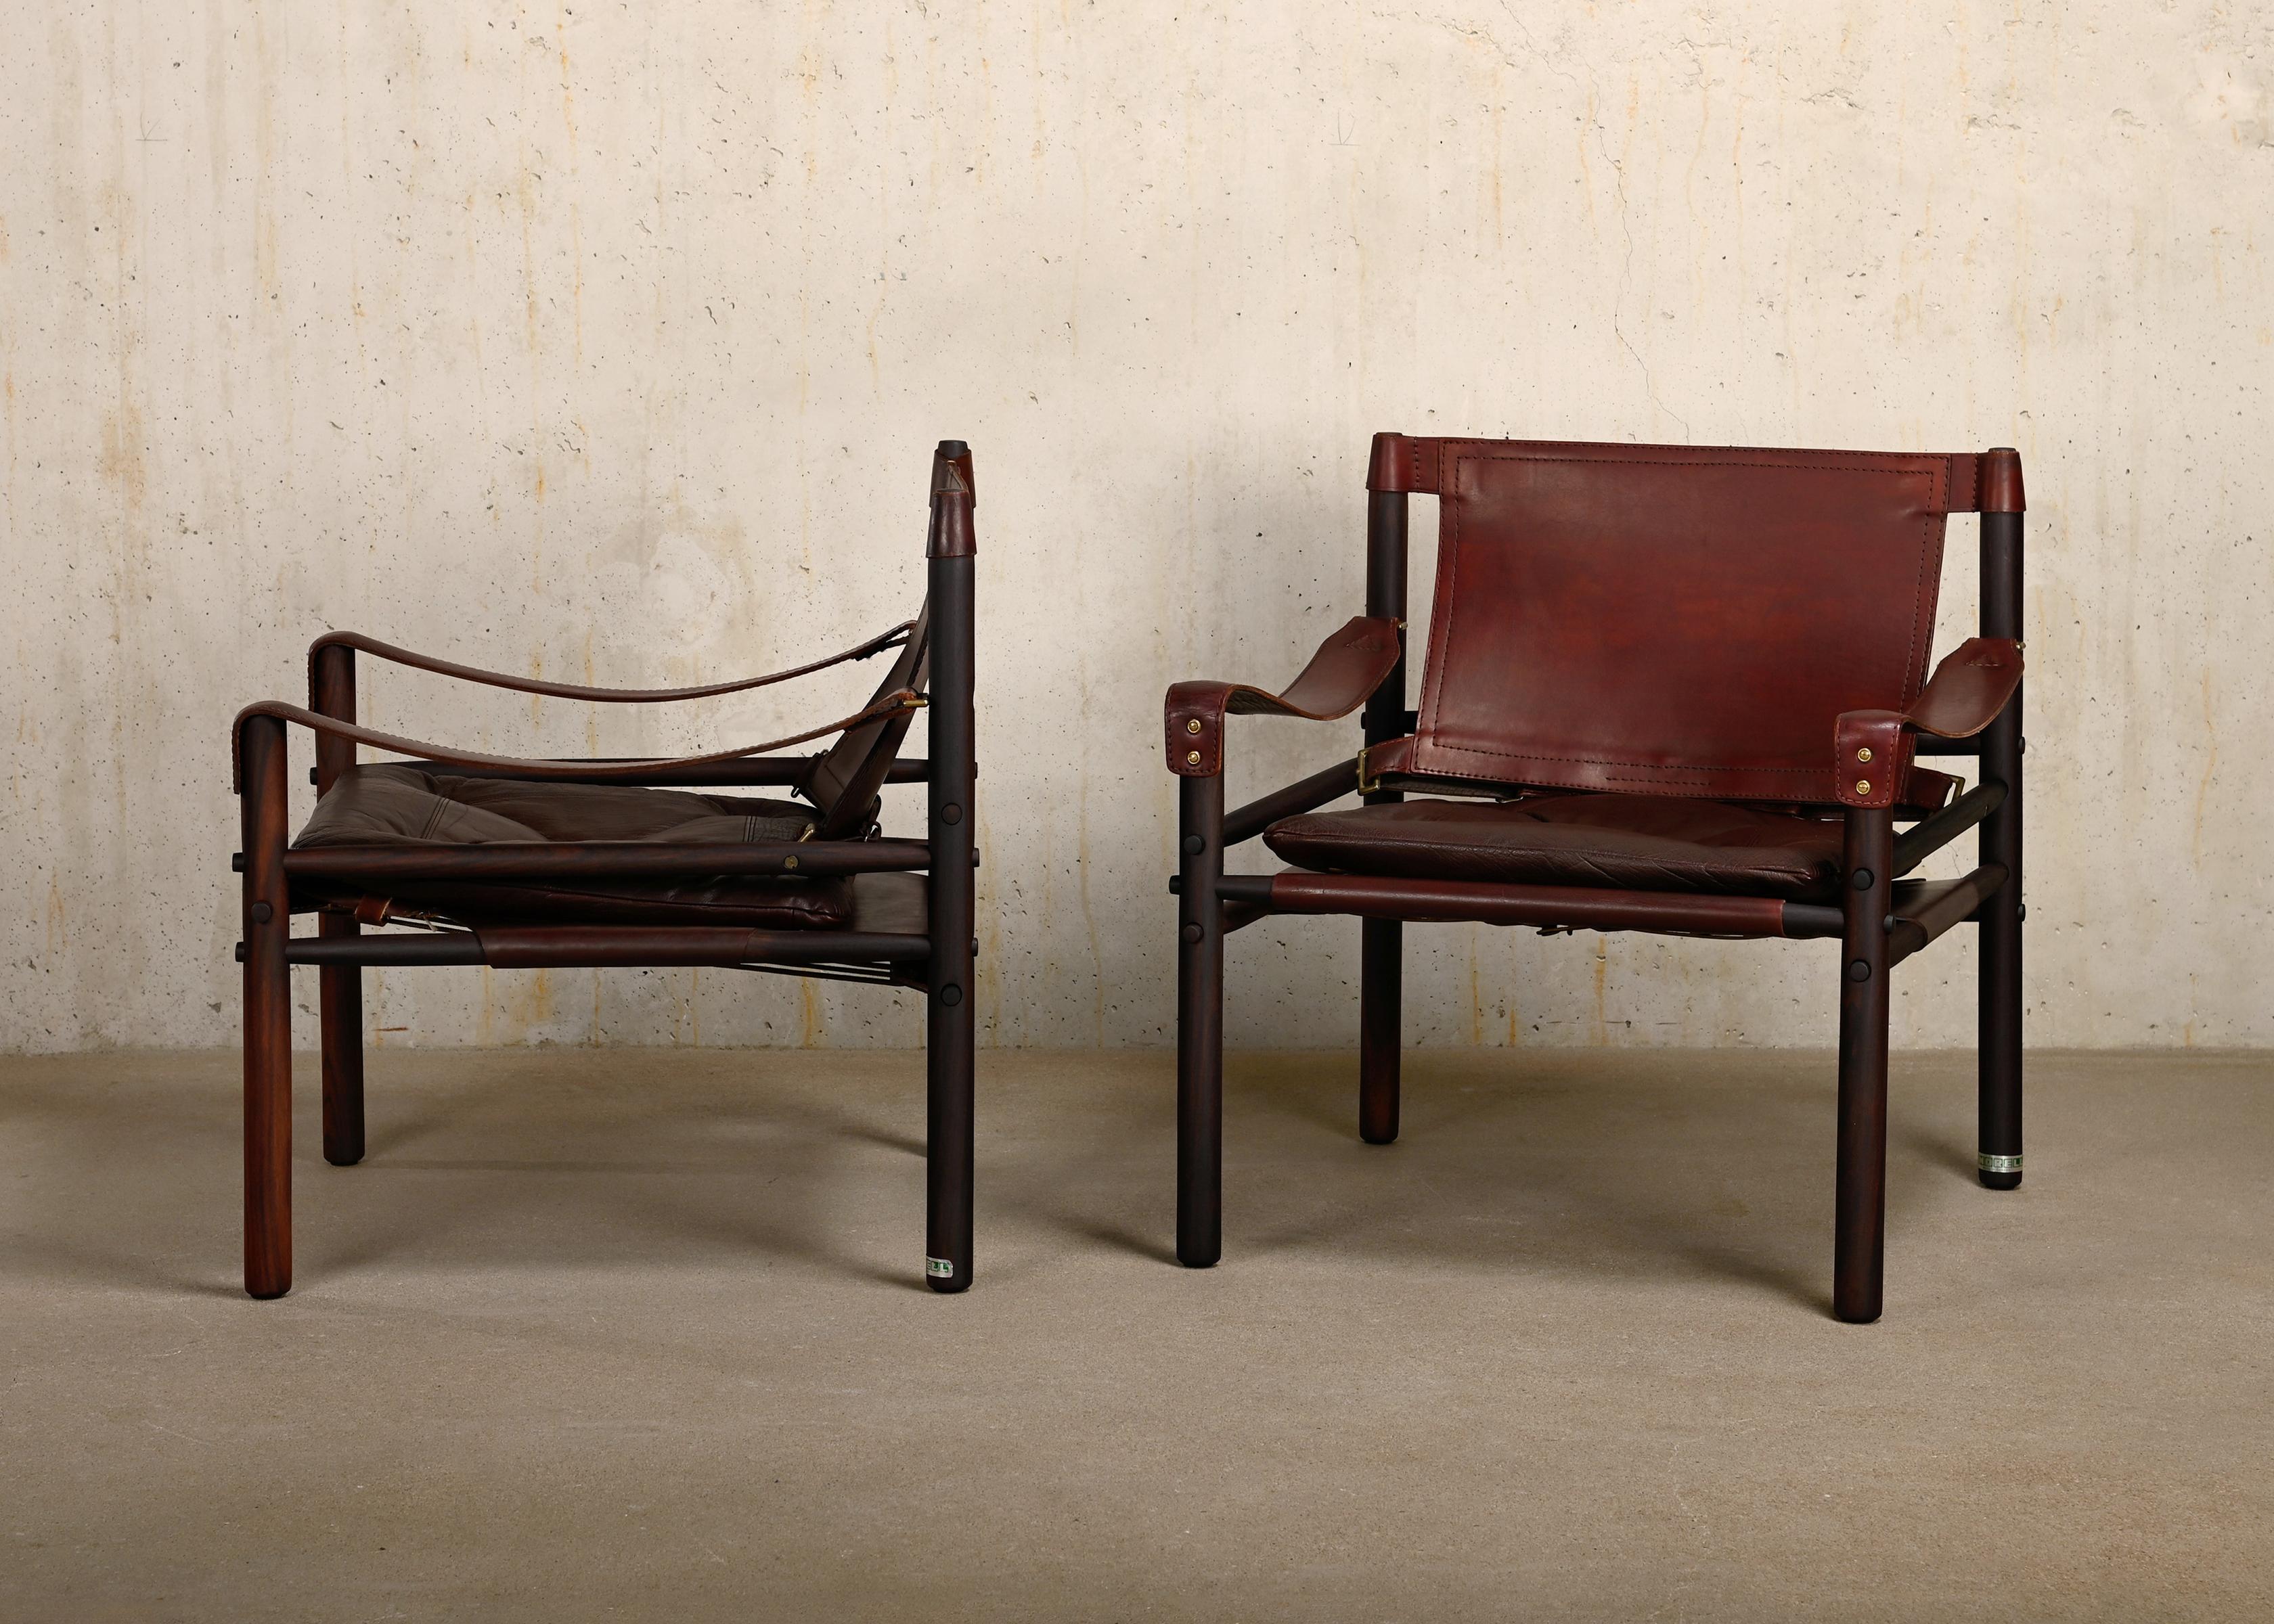 Great pair of Sirocco Safari Lounge Chairs designed by Arne Norell and manufactured by Norell Möbel AB in Sweden. Refinished rosewood frames with the original the leather cushions in beautiful patinated reddish chocolate brown leather. All in very